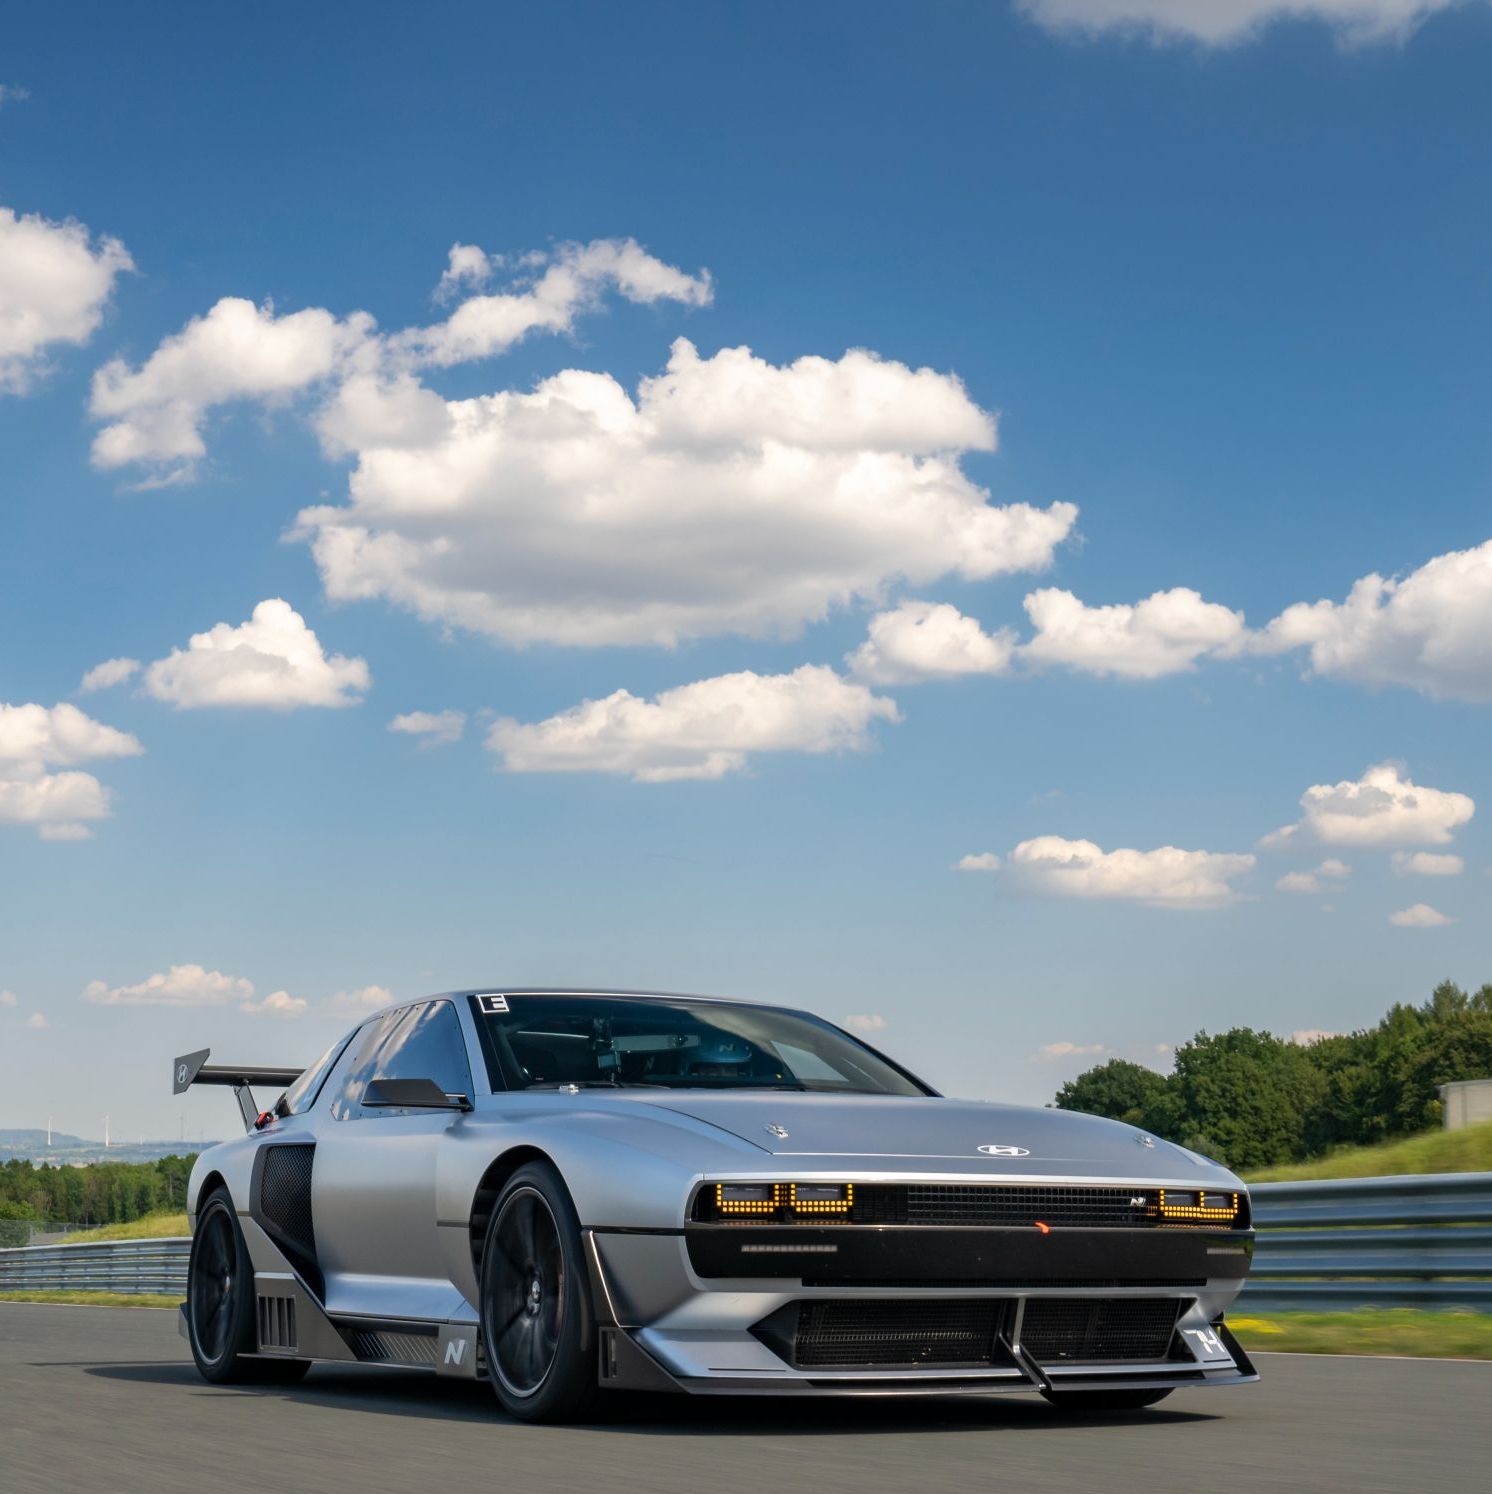 Climbing Behind the Wheel of a Hydrogen-Powered Fuel Cell Muscle Car